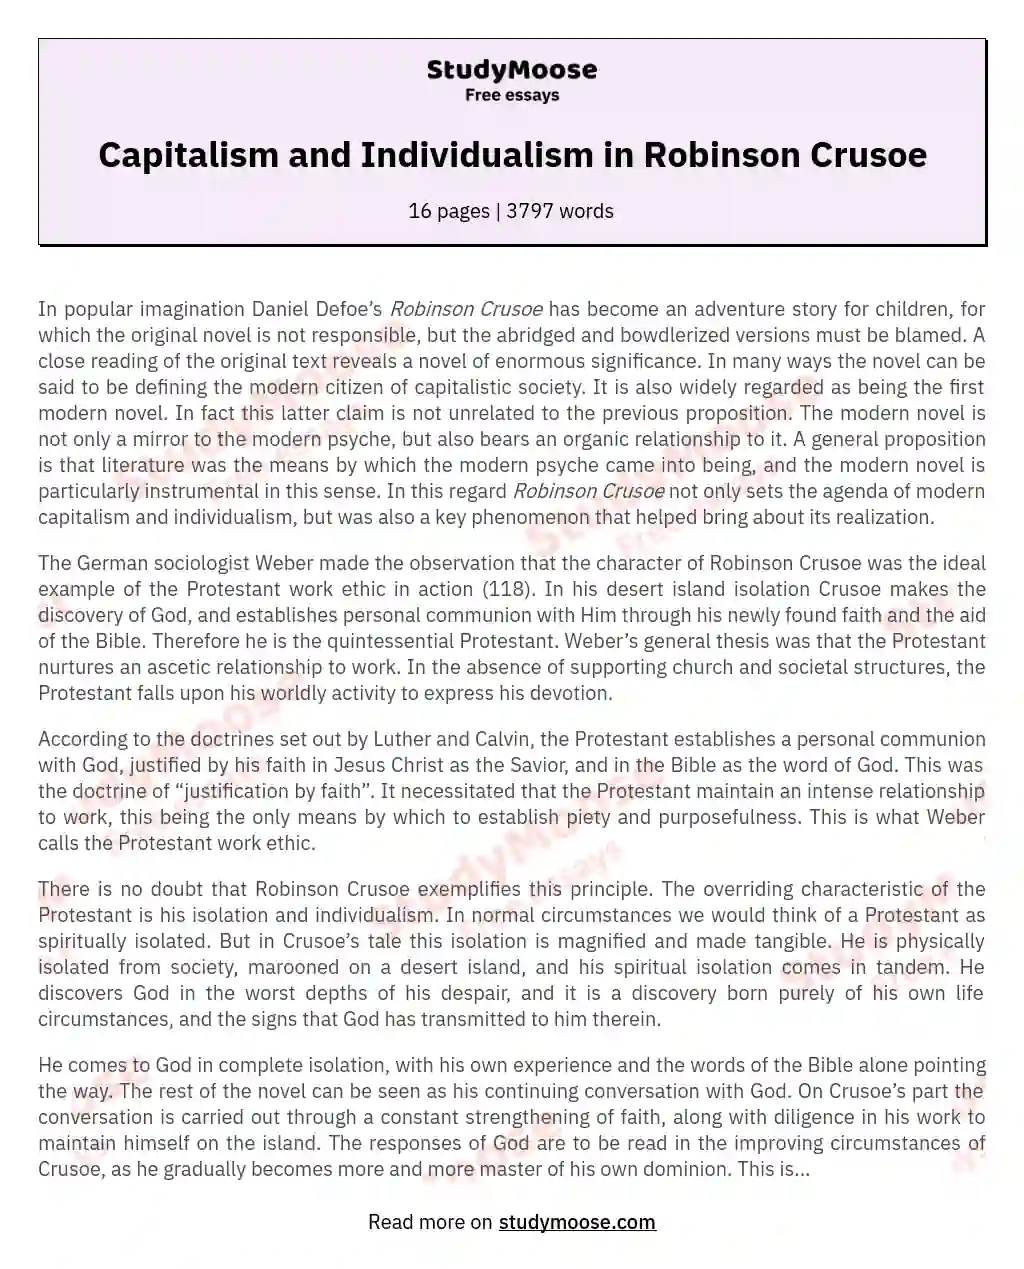 Capitalism and Individualism in Robinson Crusoe essay